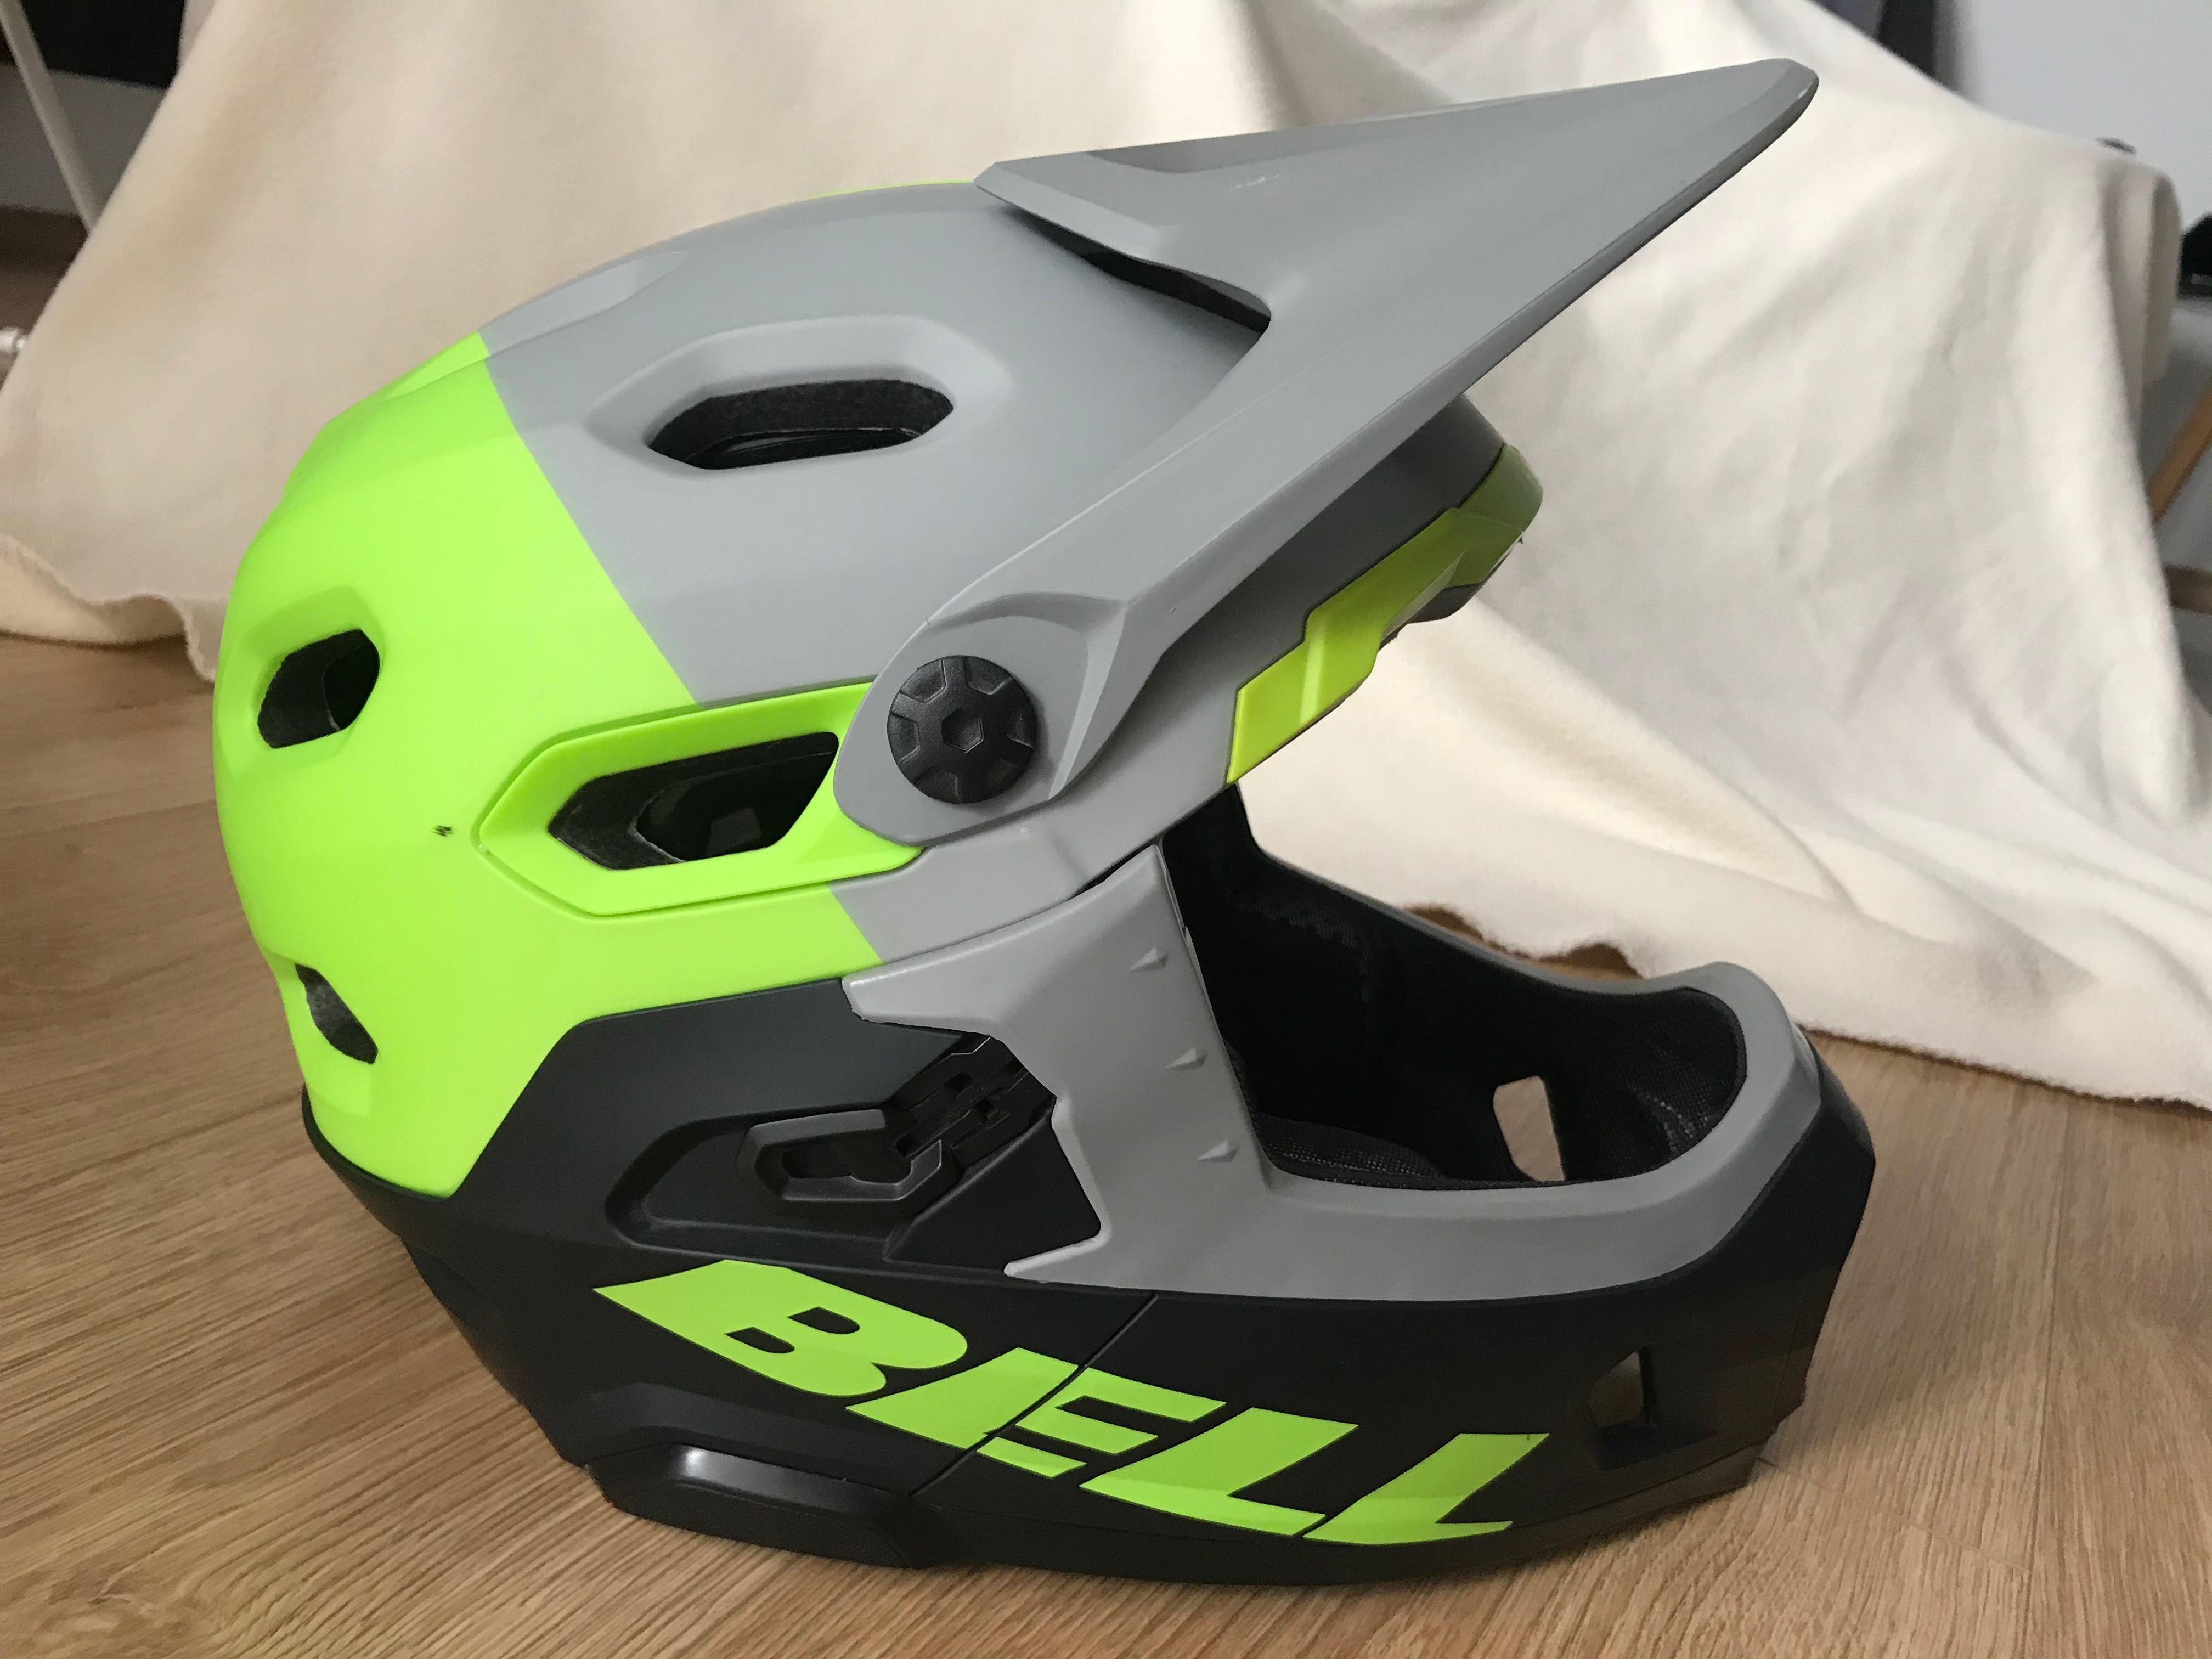 Kask rowerowy Bell Super DH